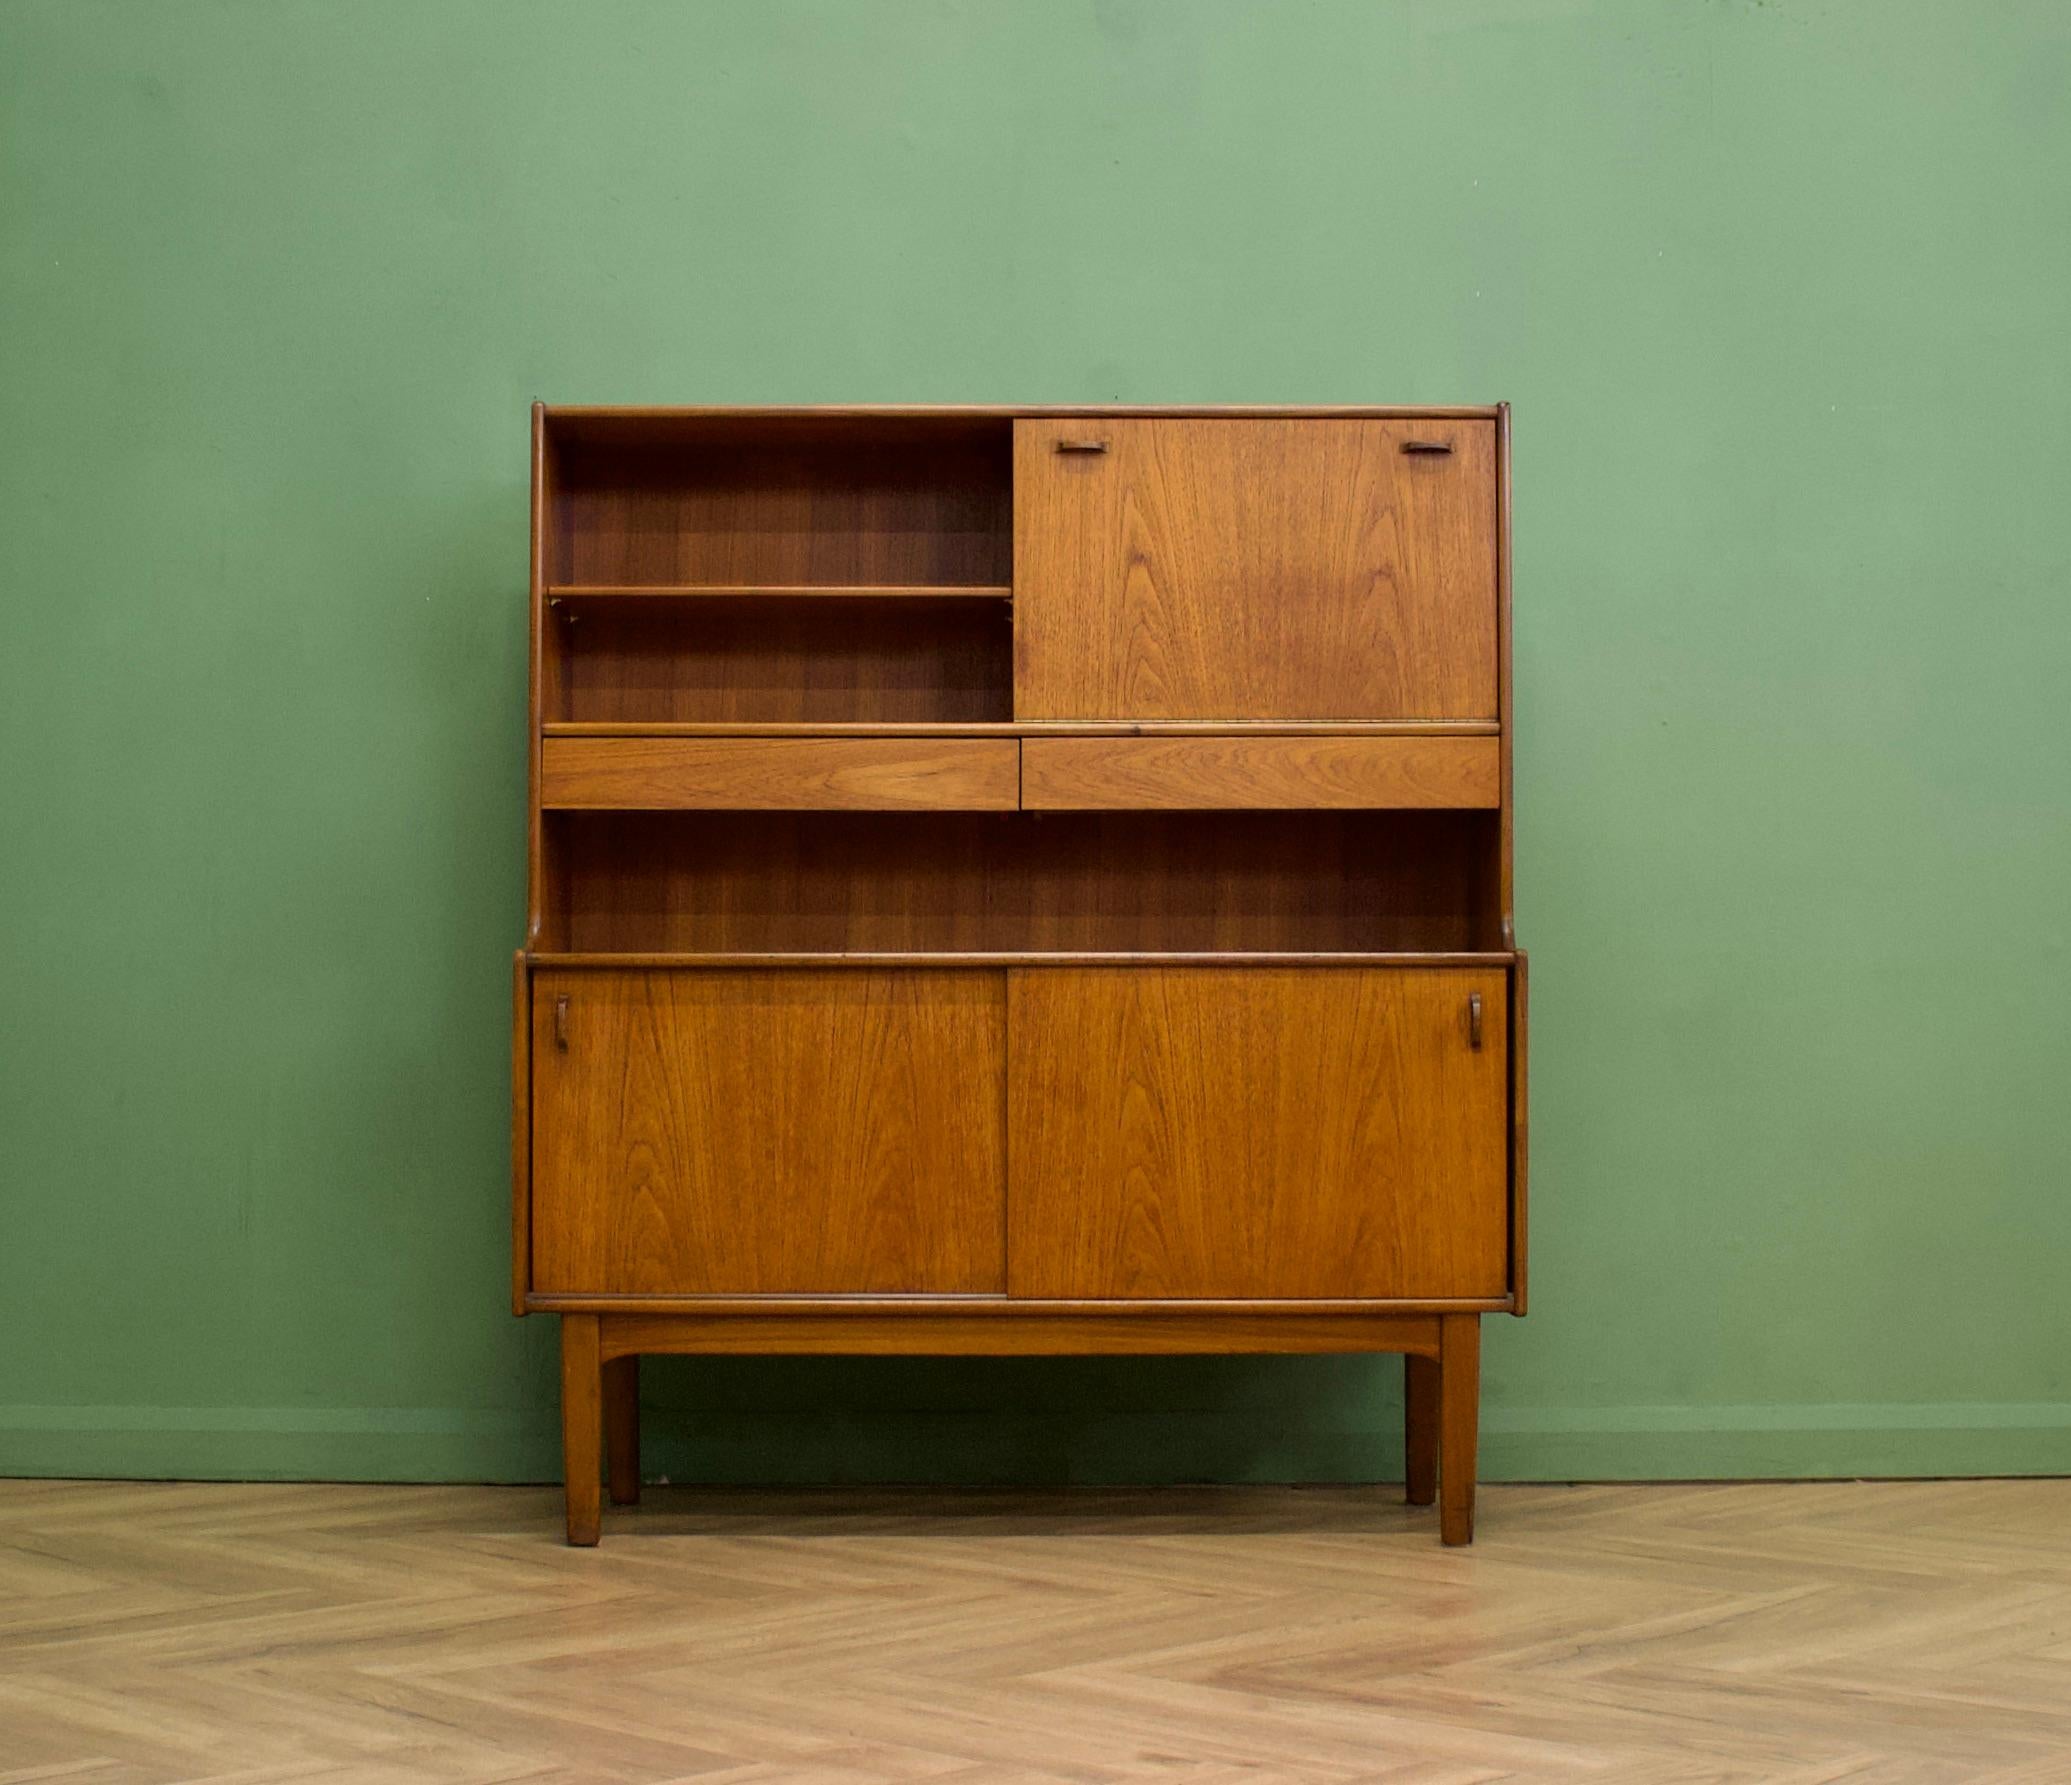 - Mid century modern highboard or sideboard
- Featuring a pull down drinks cabinet, two sliding door cupboards, two drawers and a shelf
- Manufactured by Nahan in the UK
- Made from teak and teak veneer.